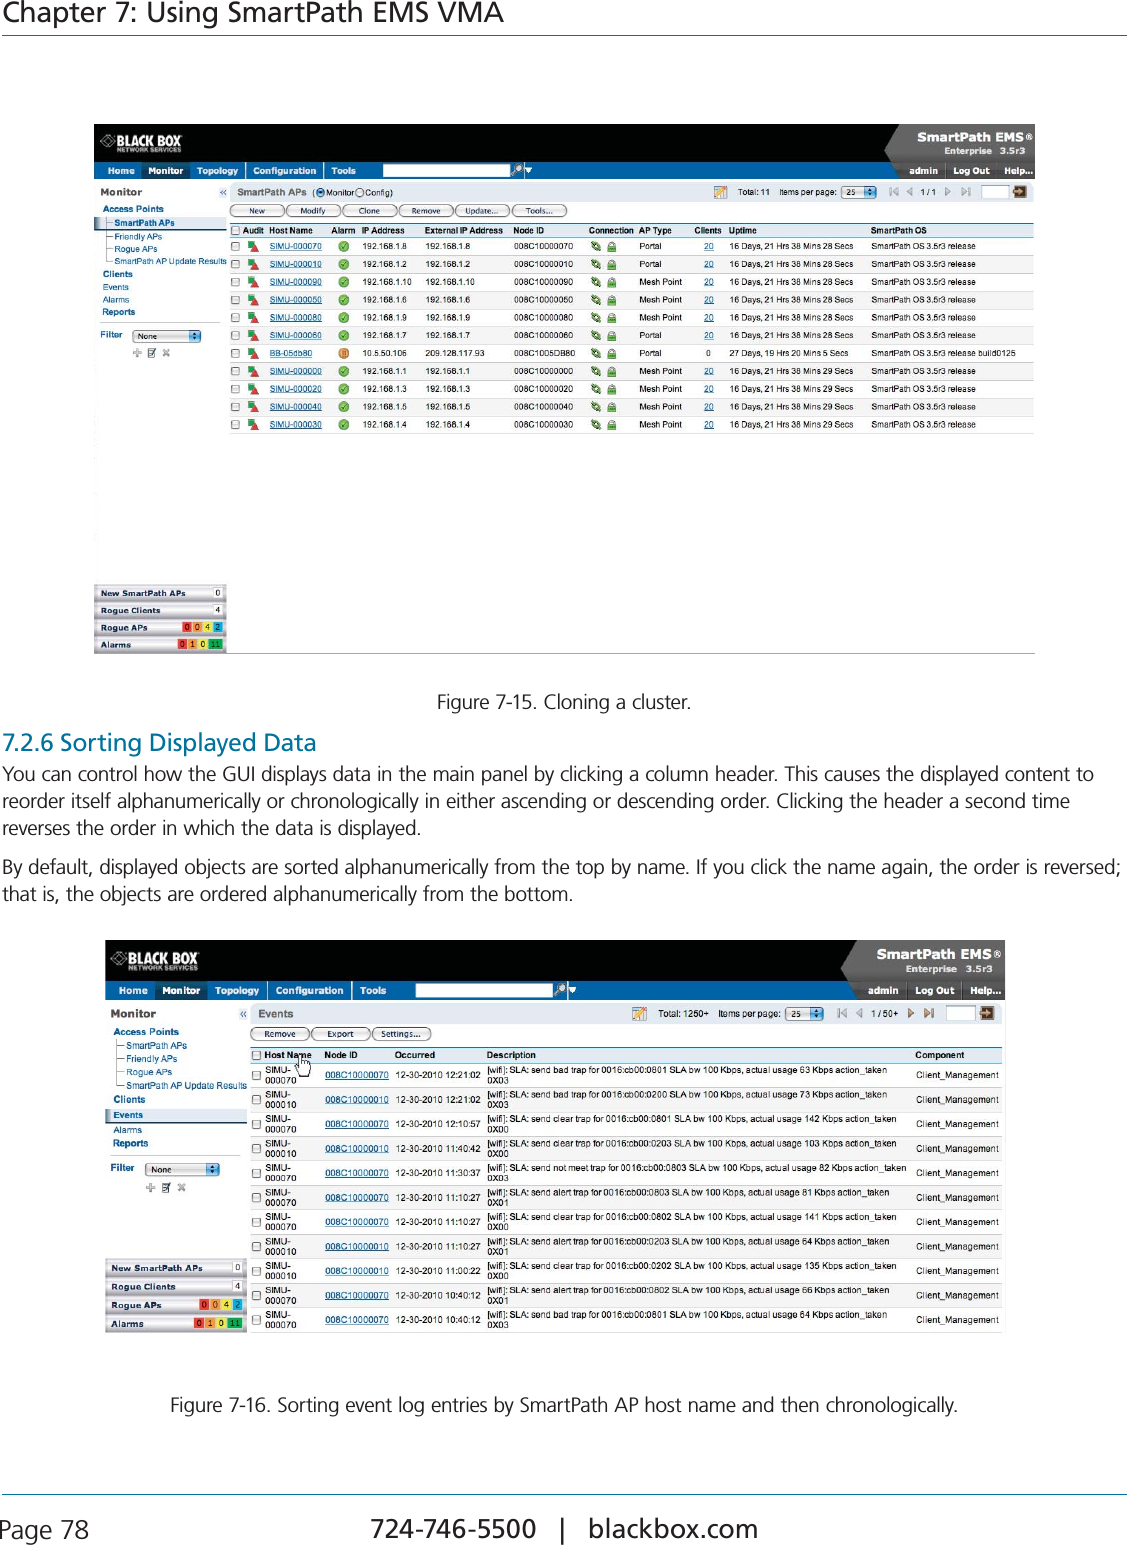 724-746-5500   |   blackbox.com Page 78Chapter 7: Using SmartPath EMS VMAFigure 7-15. Cloning a cluster.7.2.6 Sorting Displayed DataYou can control how the GUI displays data in the main panel by clicking a column header. This causes the displayed content to reorder itself alphanumerically or chronologically in either ascending or descending order. Clicking the header a second time reverses the order in which the data is displayed.By default, displayed objects are sorted alphanumerically from the top by name. If you click the name again, the order is reversed; that is, the objects are ordered alphanumerically from the bottom.Figure 7-16. Sorting event log entries by SmartPath AP host name and then chronologically.